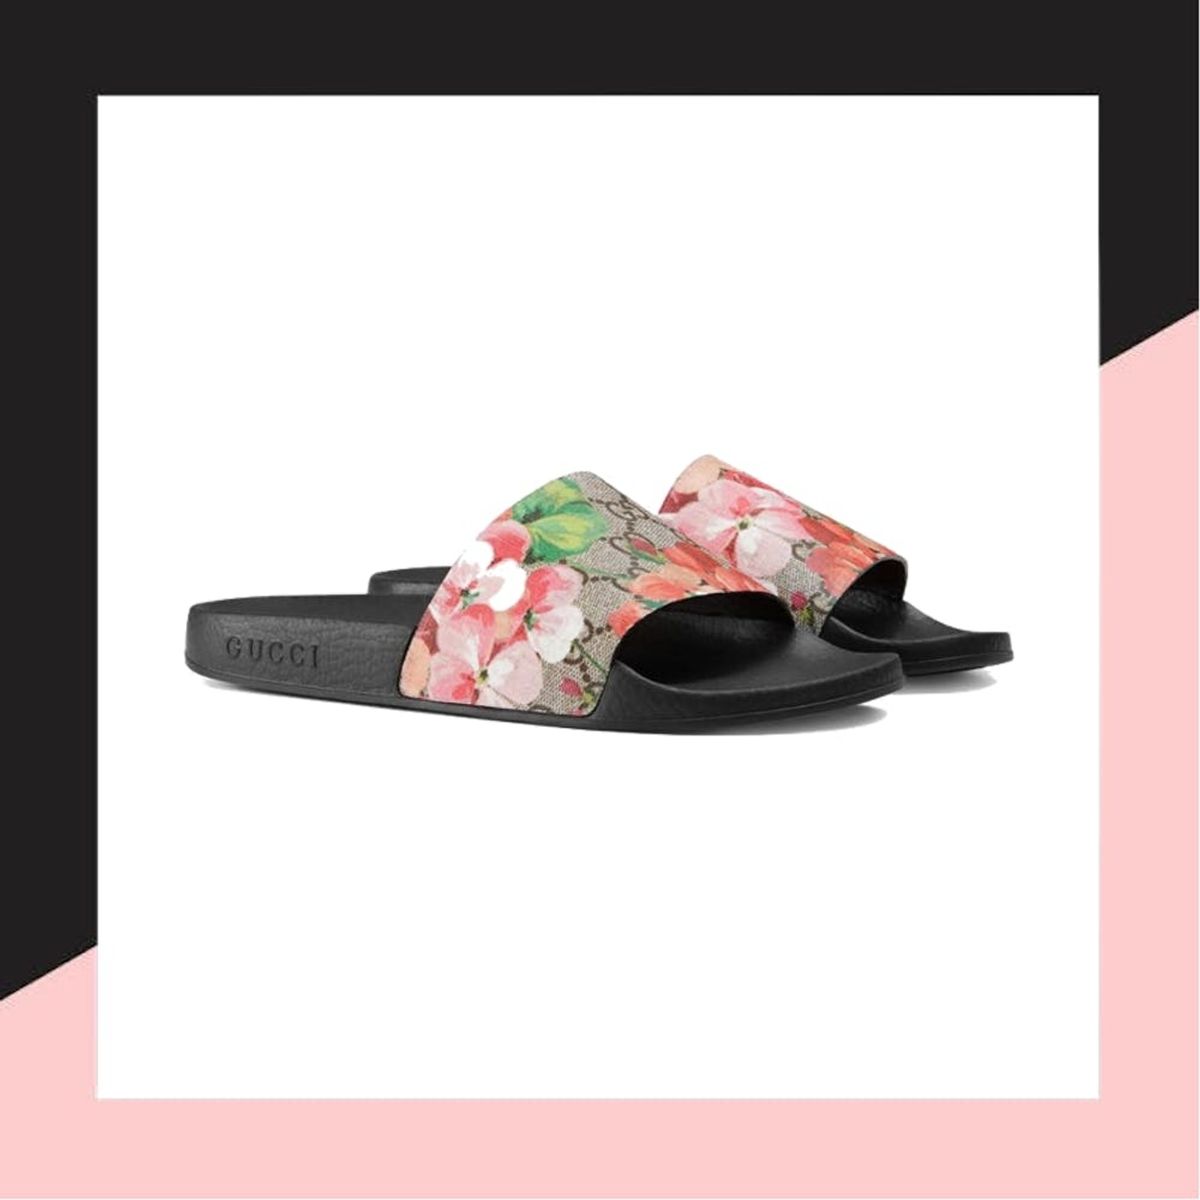 These ’90s Sandals Are the Official Must-Have Product of the Summer